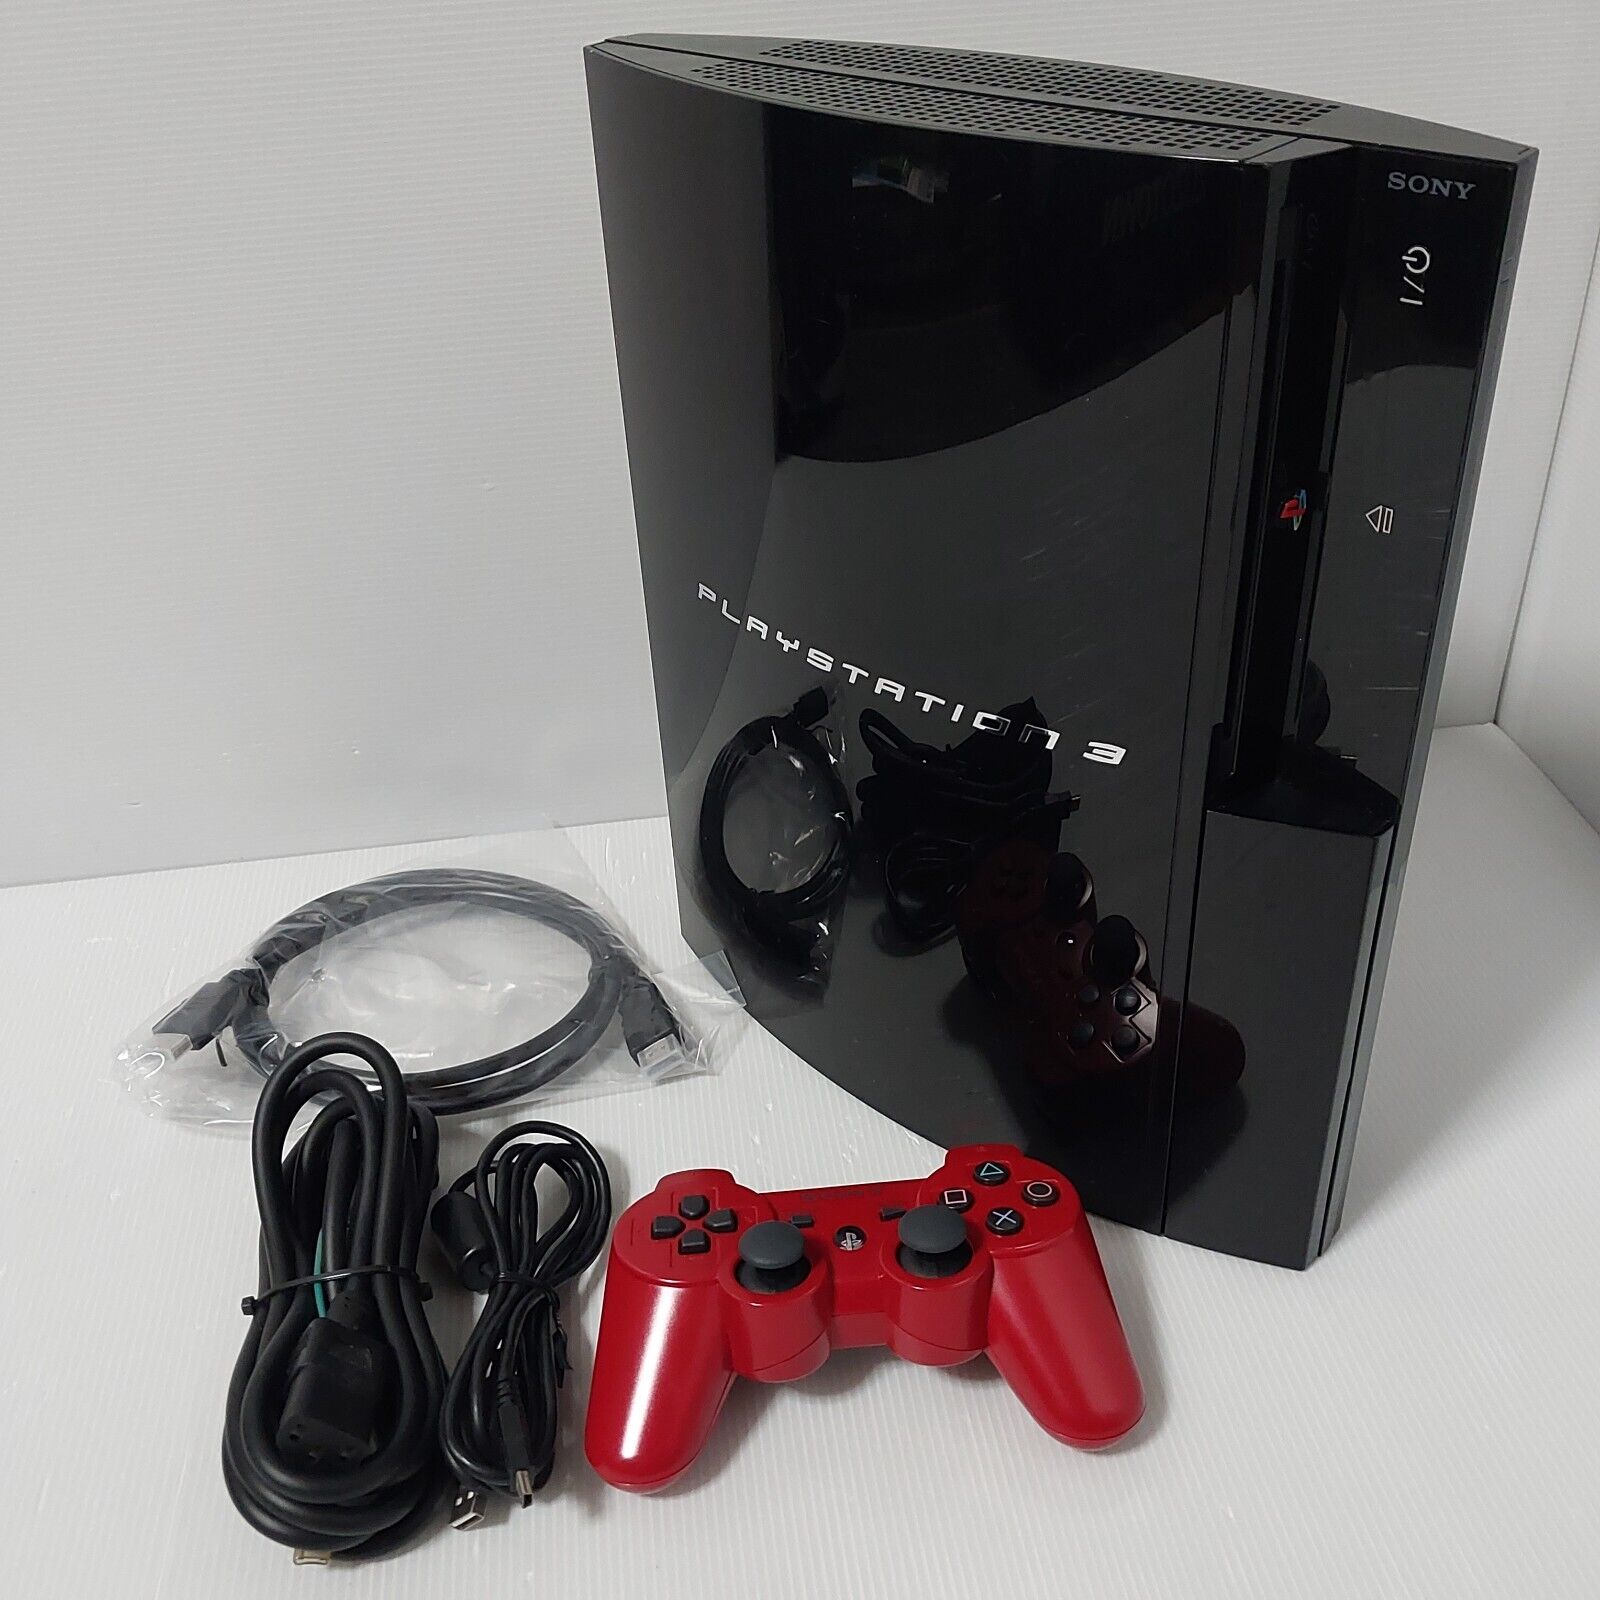 SONY PlayStation3 PS3 Japanese Delid console CECHB00 20GB